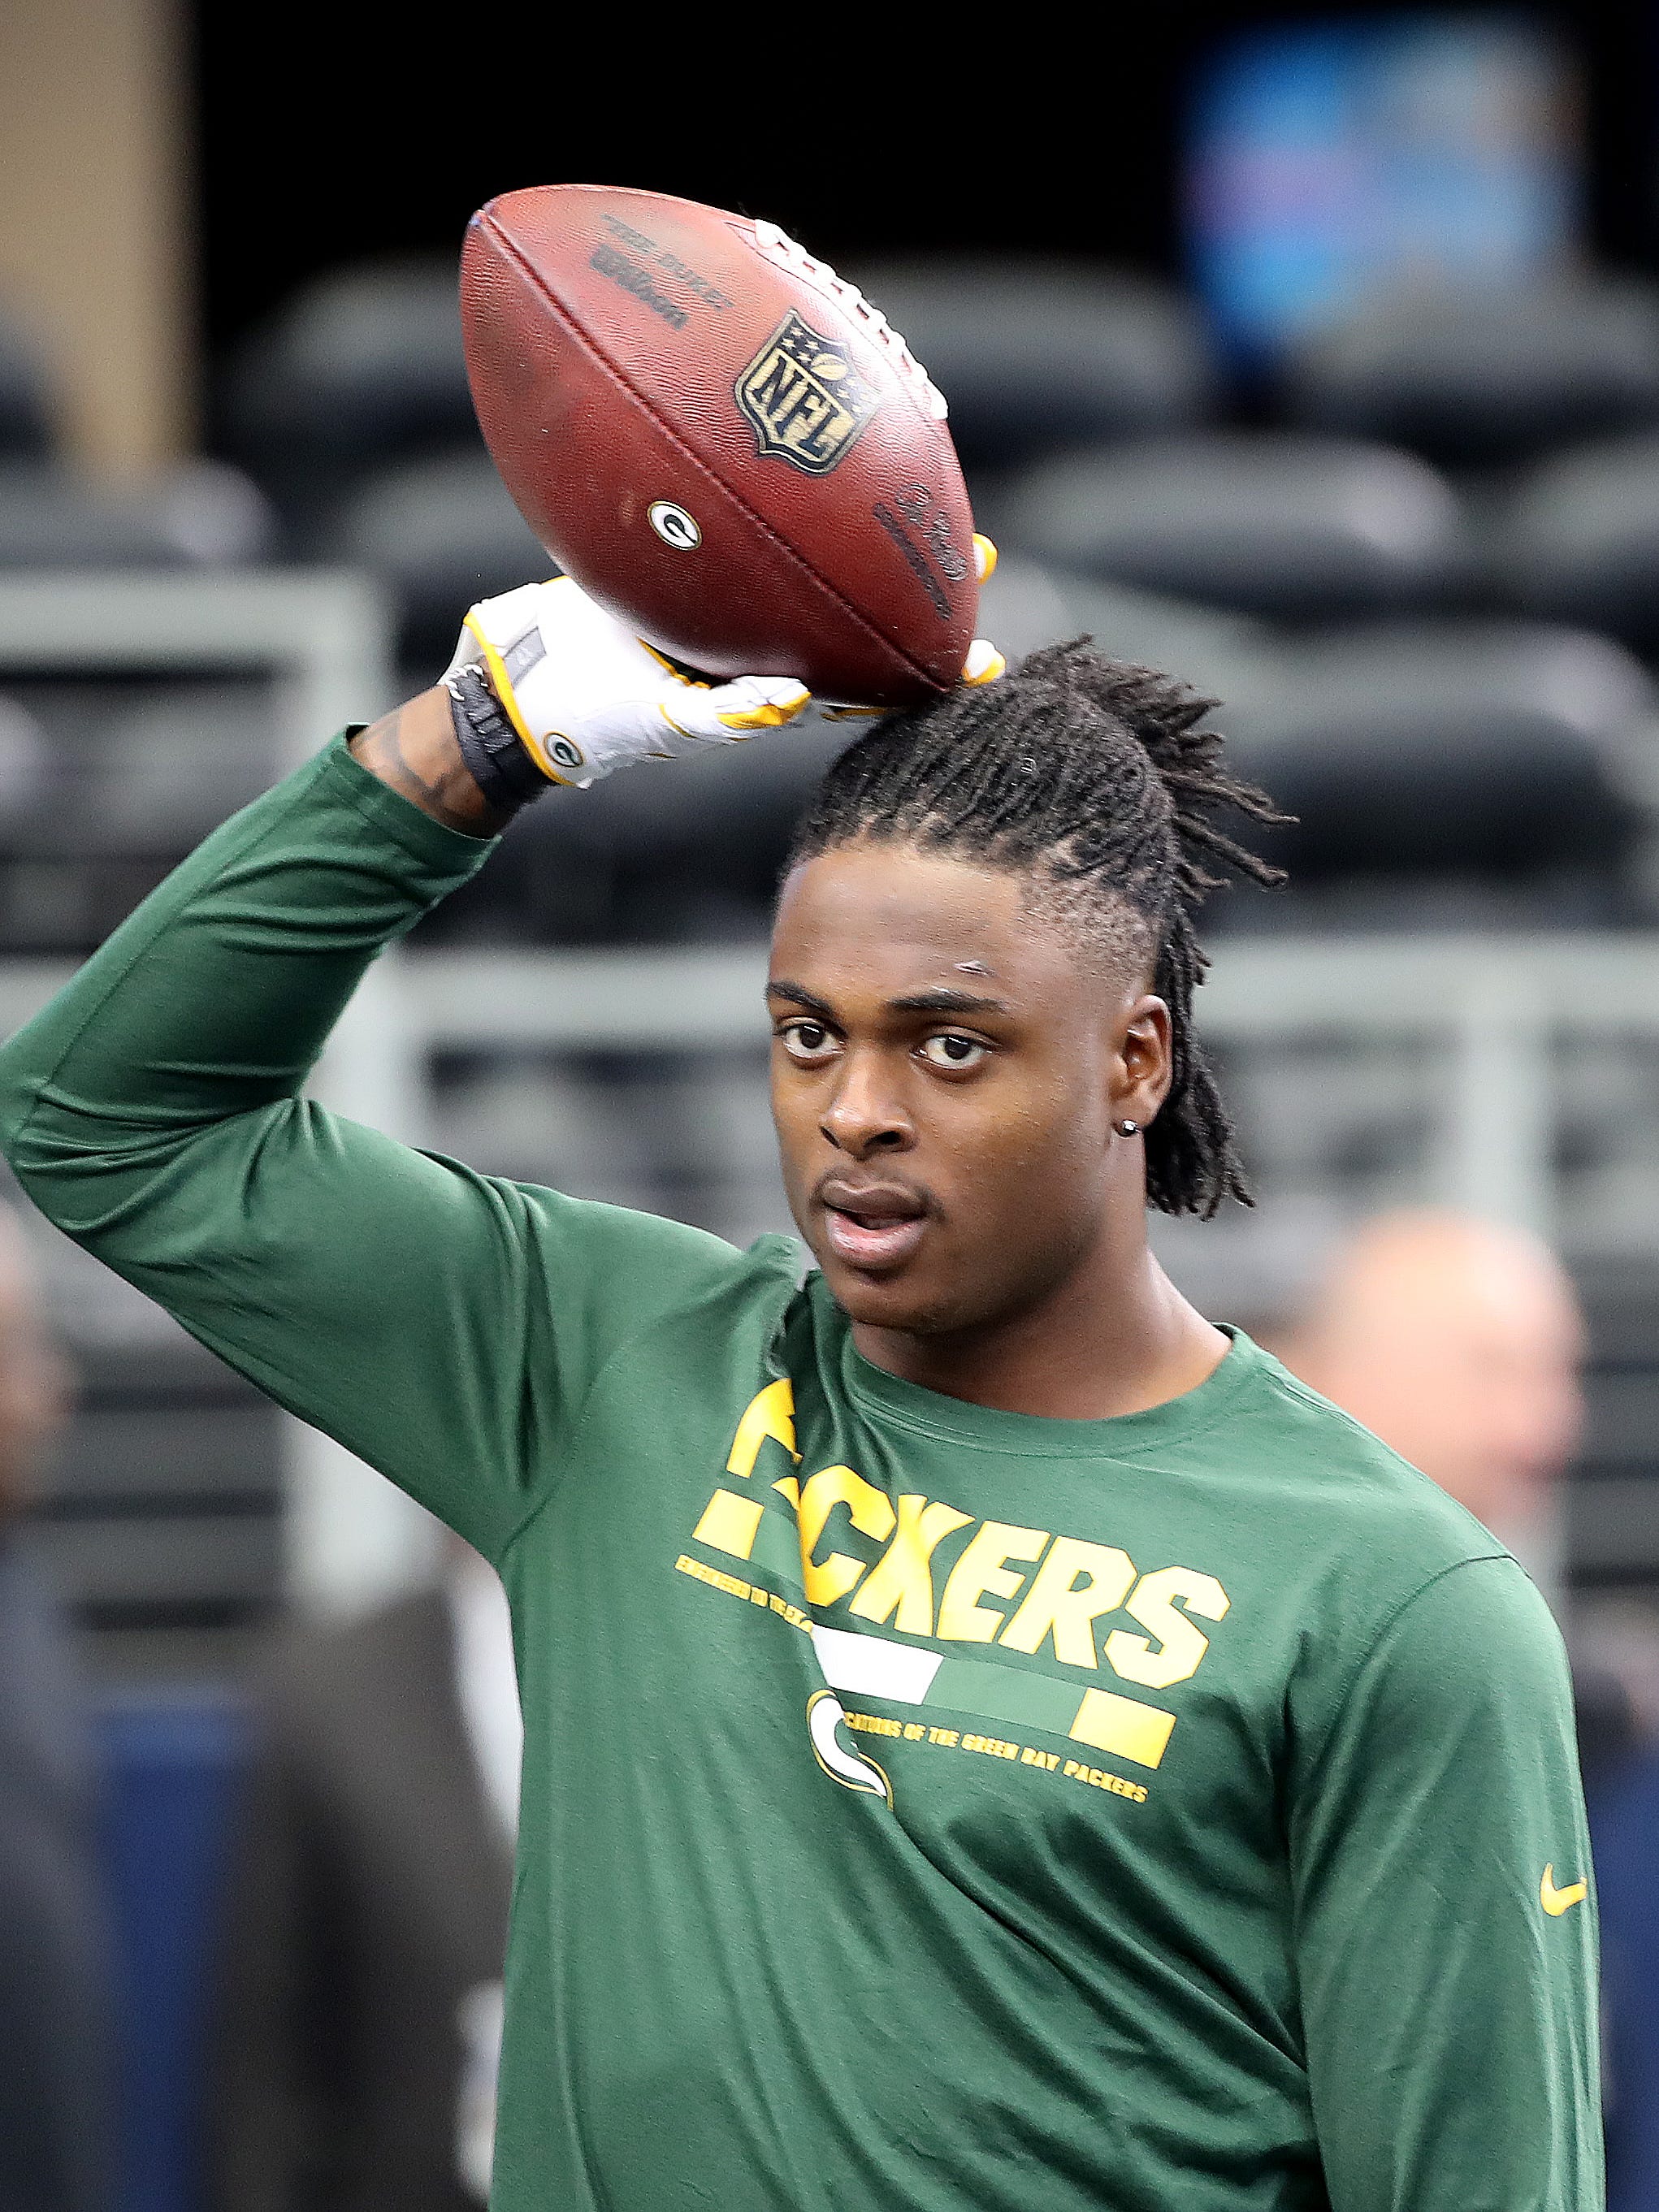 Green Bay Packers wide receiver Davante Adams (17) loosens up before the game against the Dallas Cowboys Sunday, October 8, 2017 at AT&T Stadium in Arlington, Tx. Adams has just been cleared through the concussion protocol.